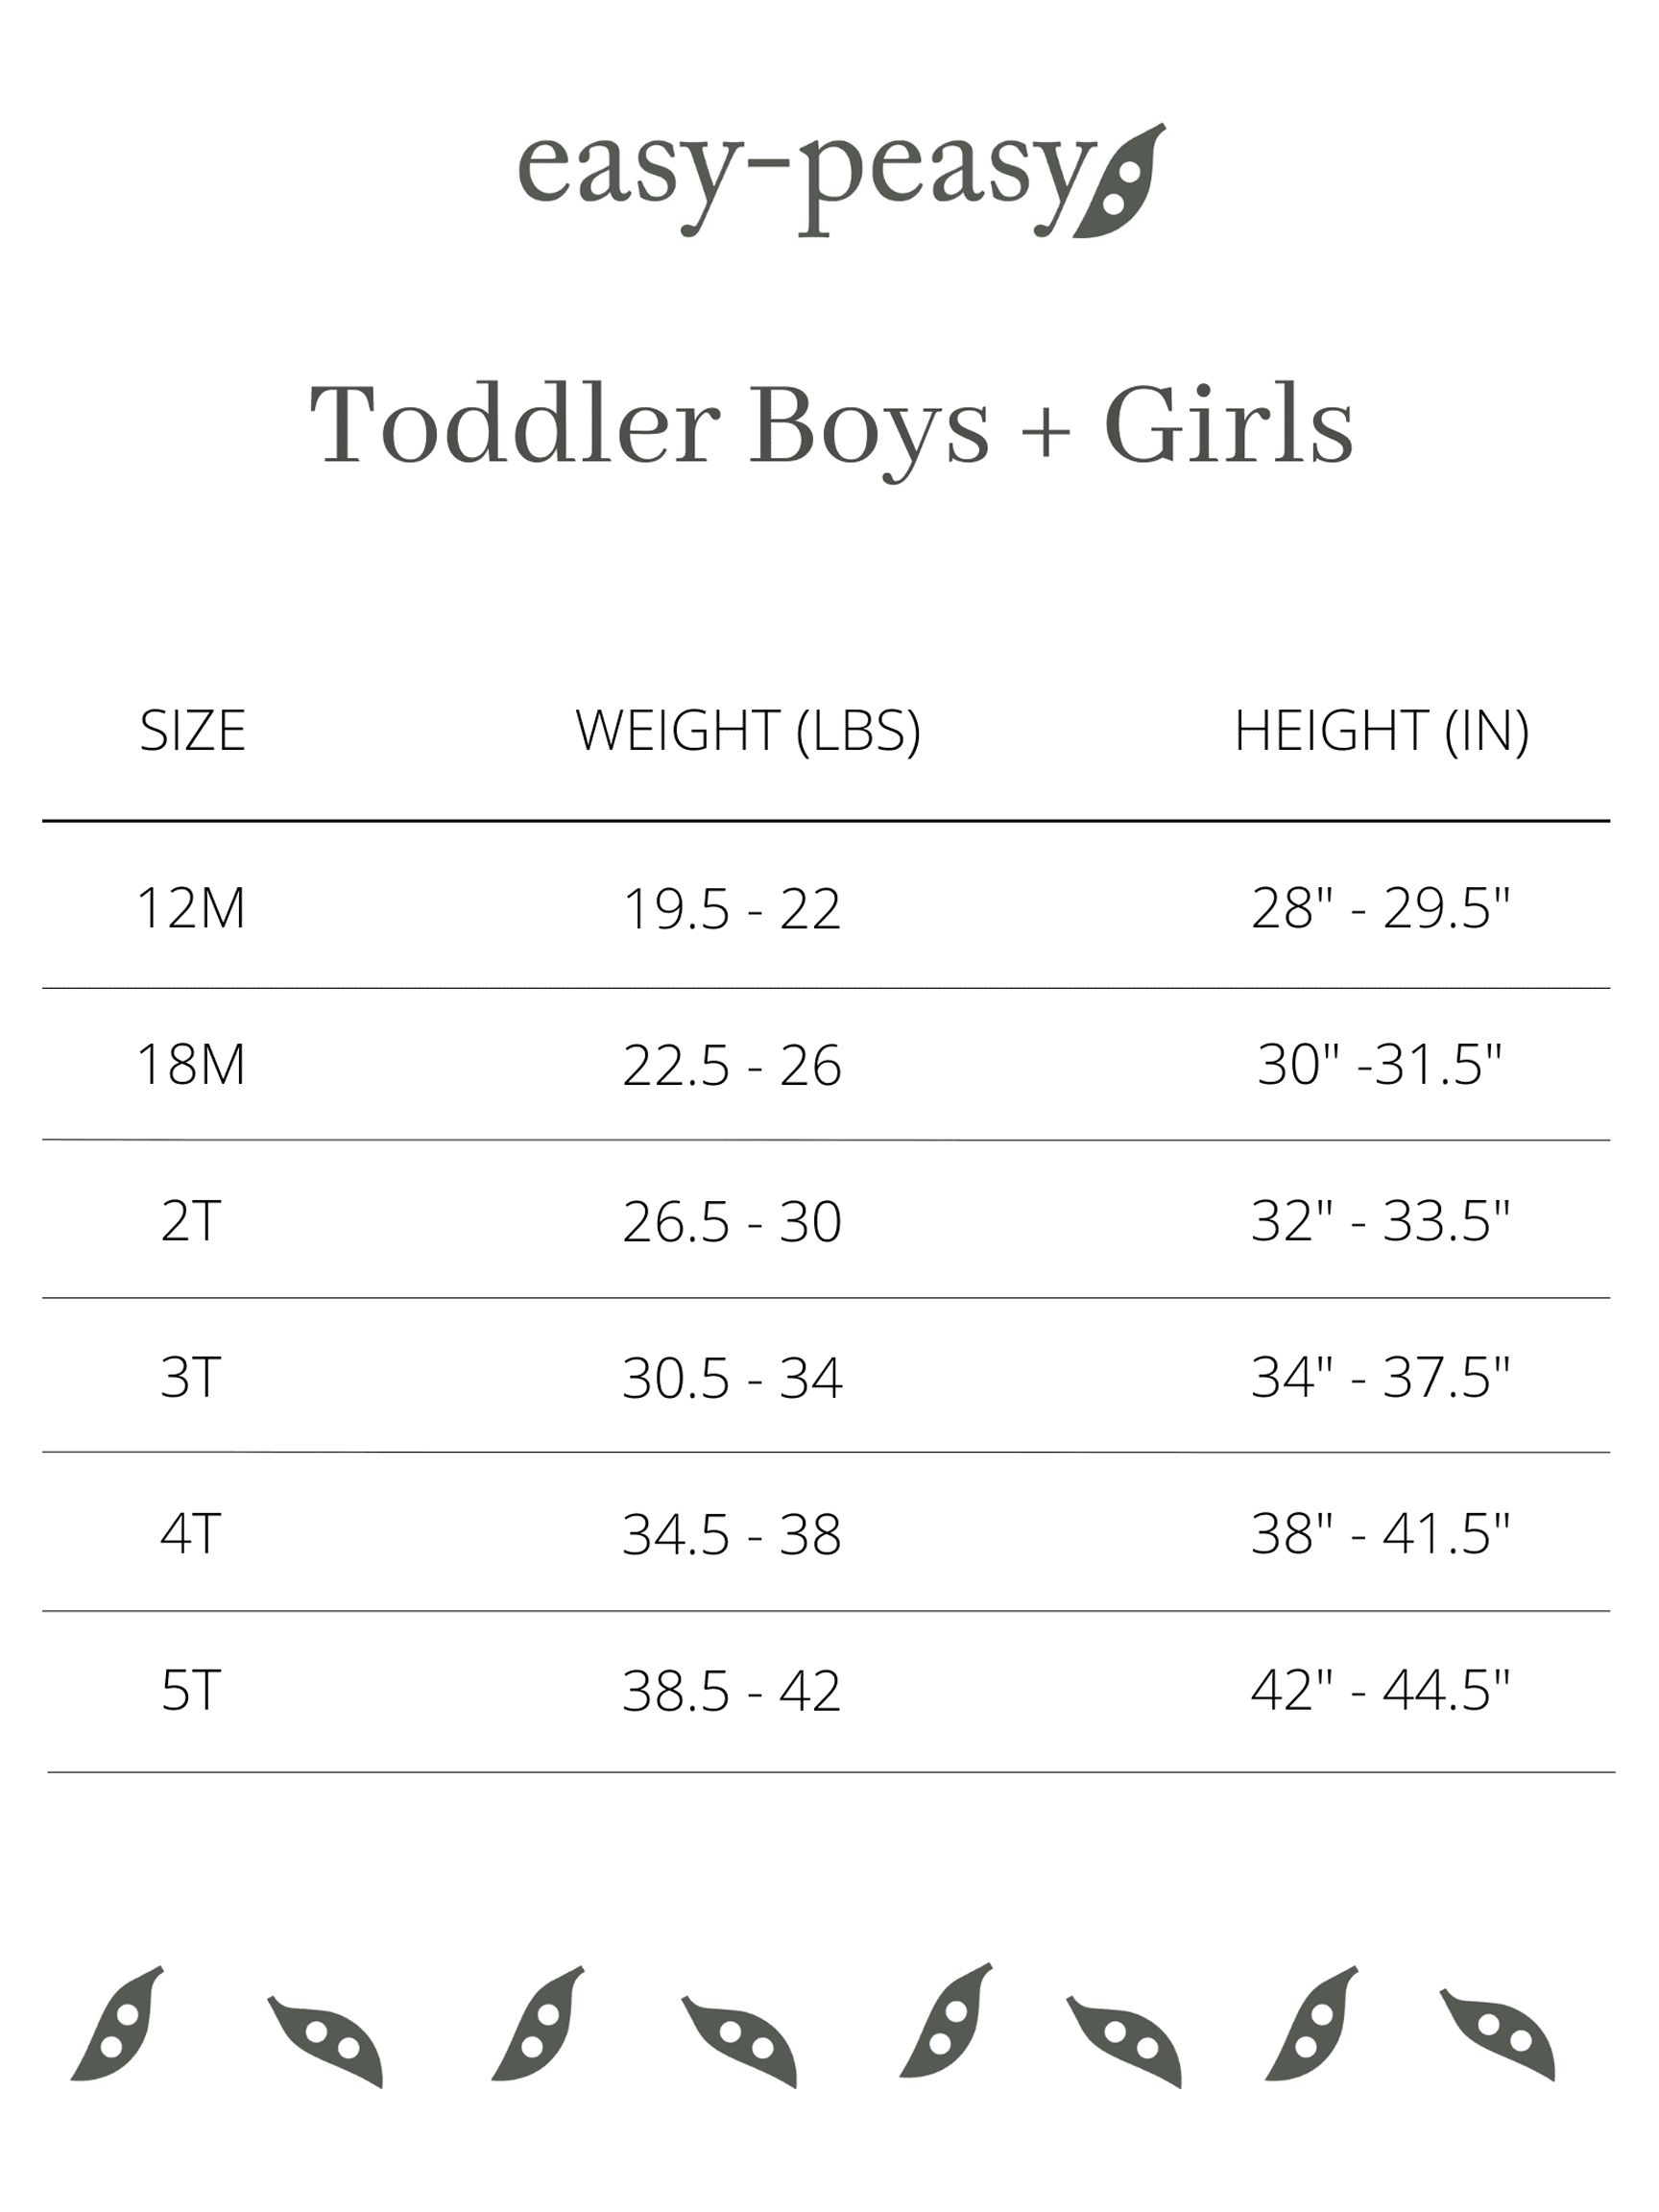 easy-peasy Toddler Boy Short Sleeve Camp Shirt, Sizes 12 Months-5T - image 5 of 5